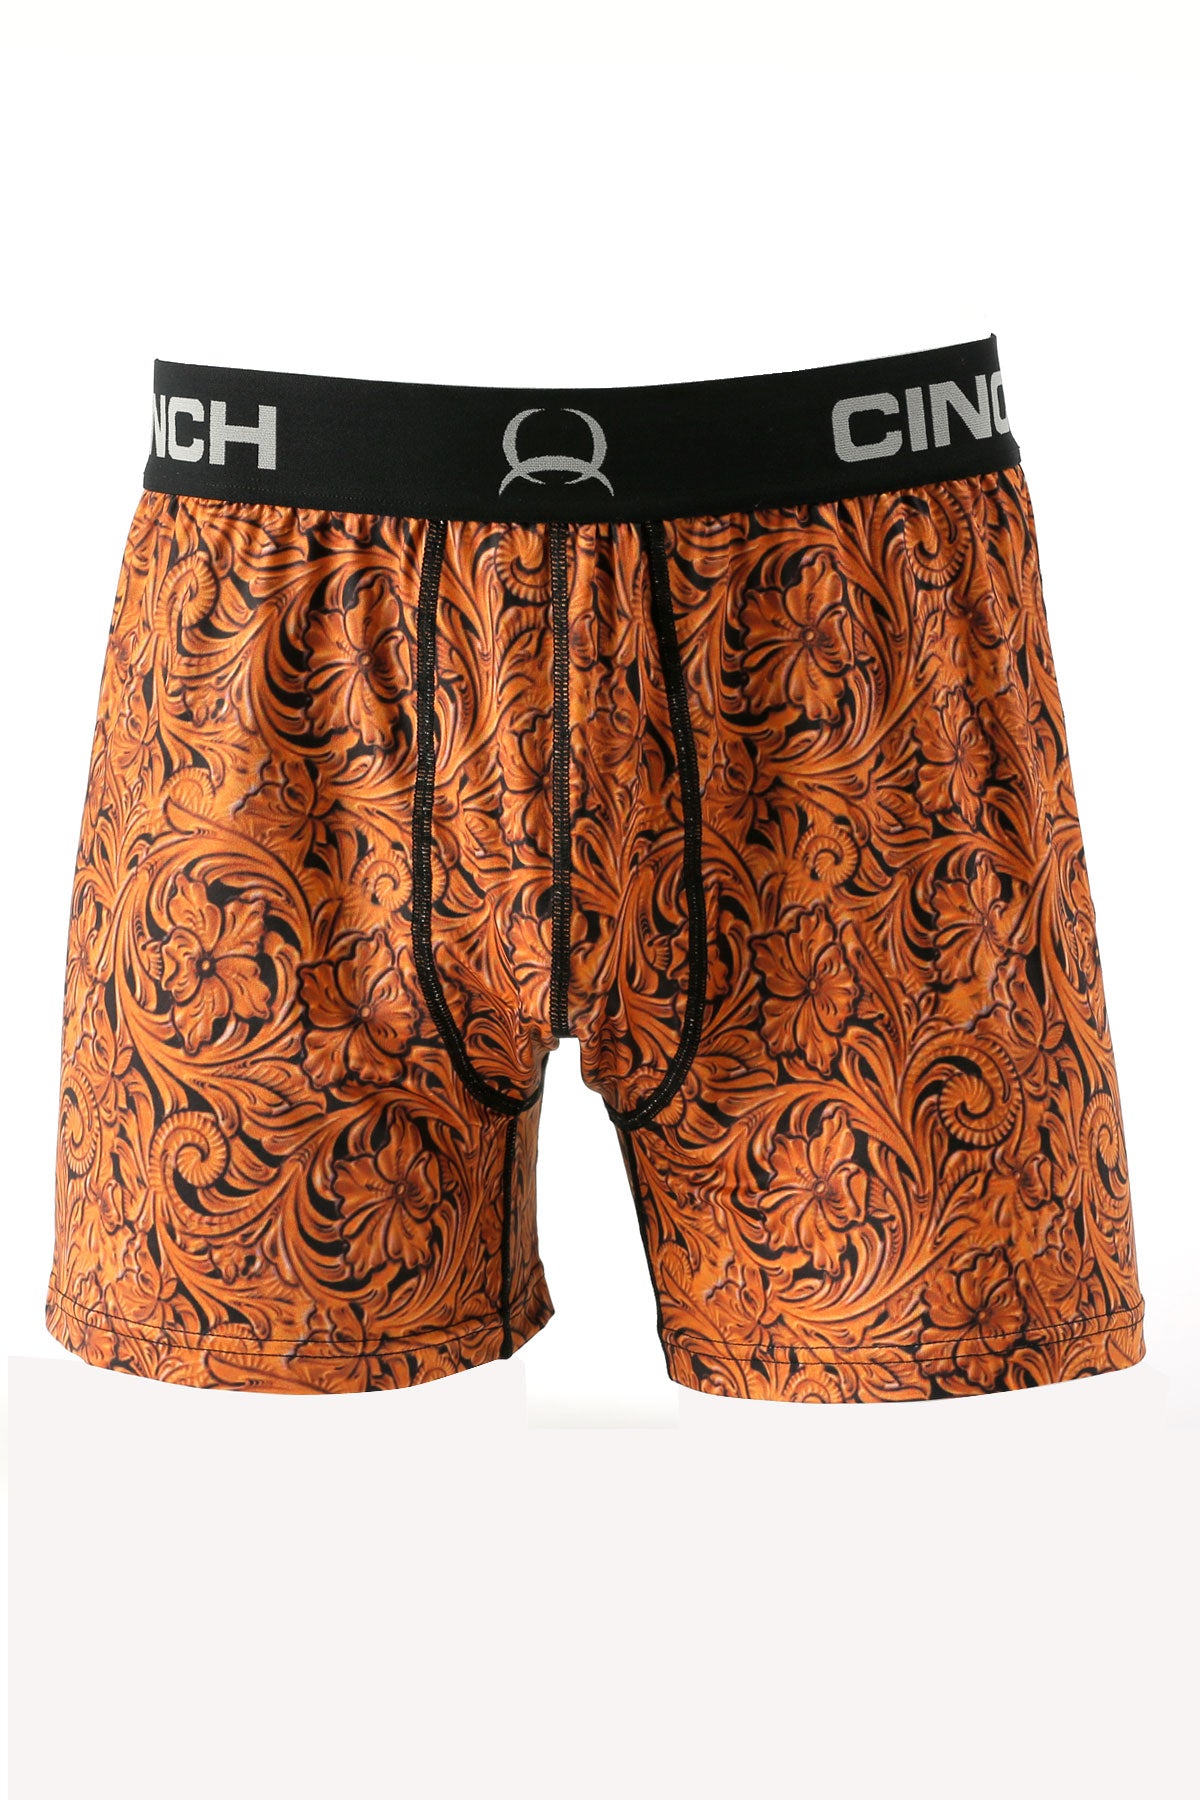 CINCH MEN'S TOOLED LEATHER LOOSE FIT BOXER